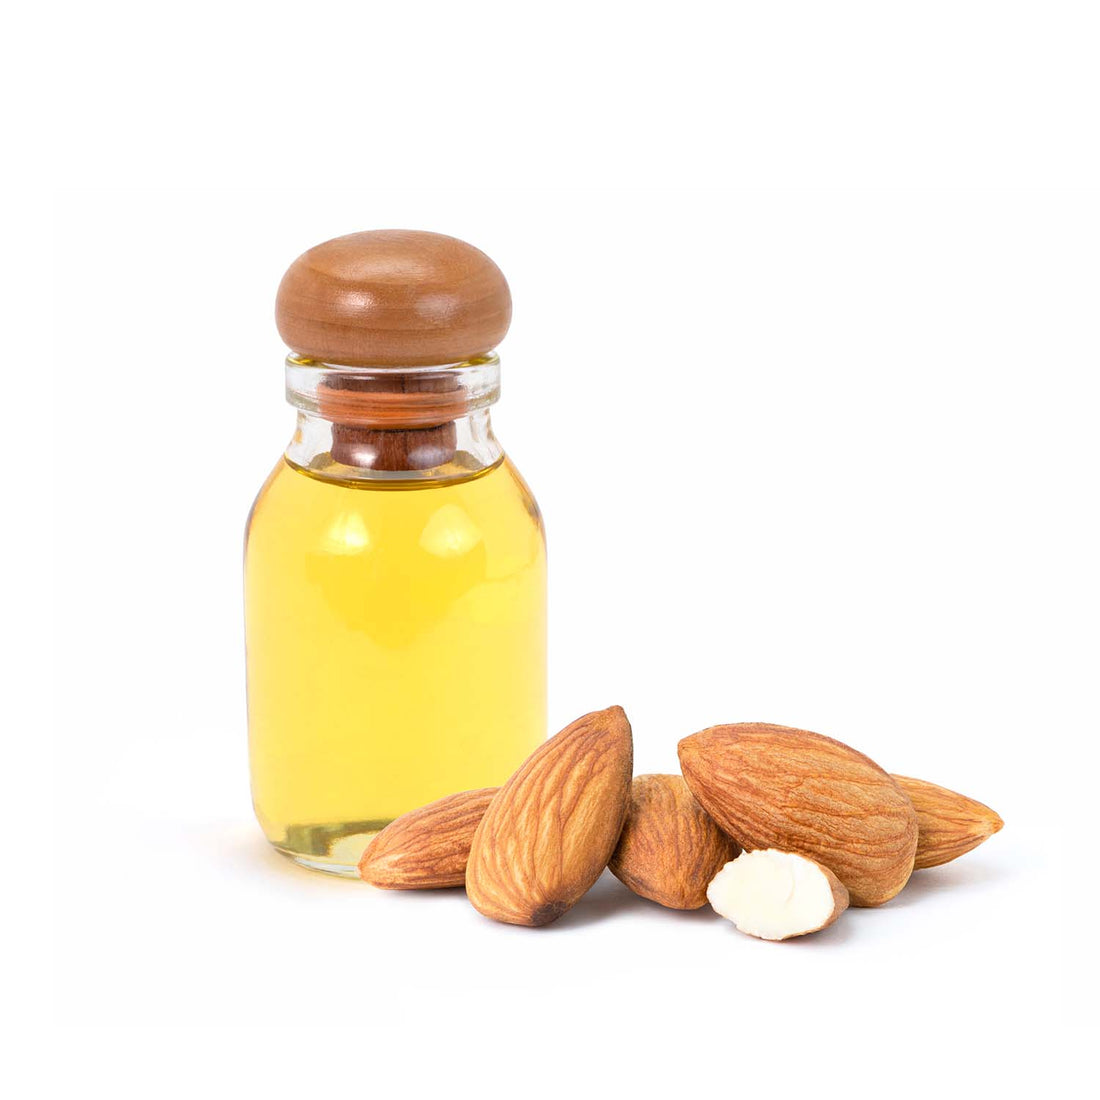 Almond oil, a superb natural moisturizer, is derived from Sweet Almond.